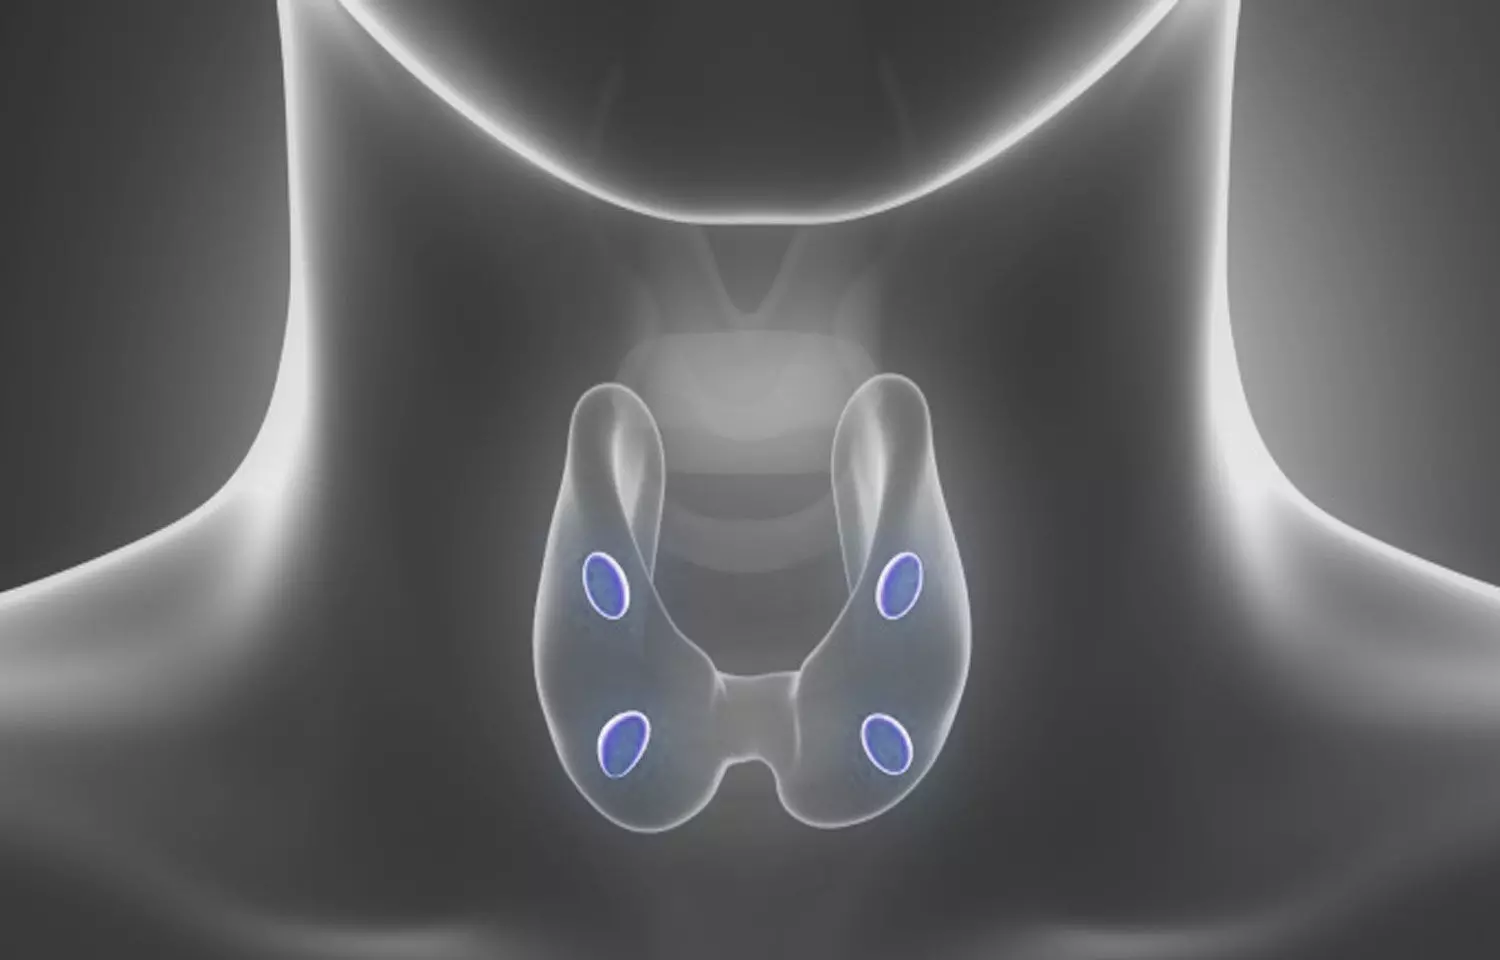 Choline-PET/CT best preoperative imaging tool for localization of hyperparathyroidism: Study